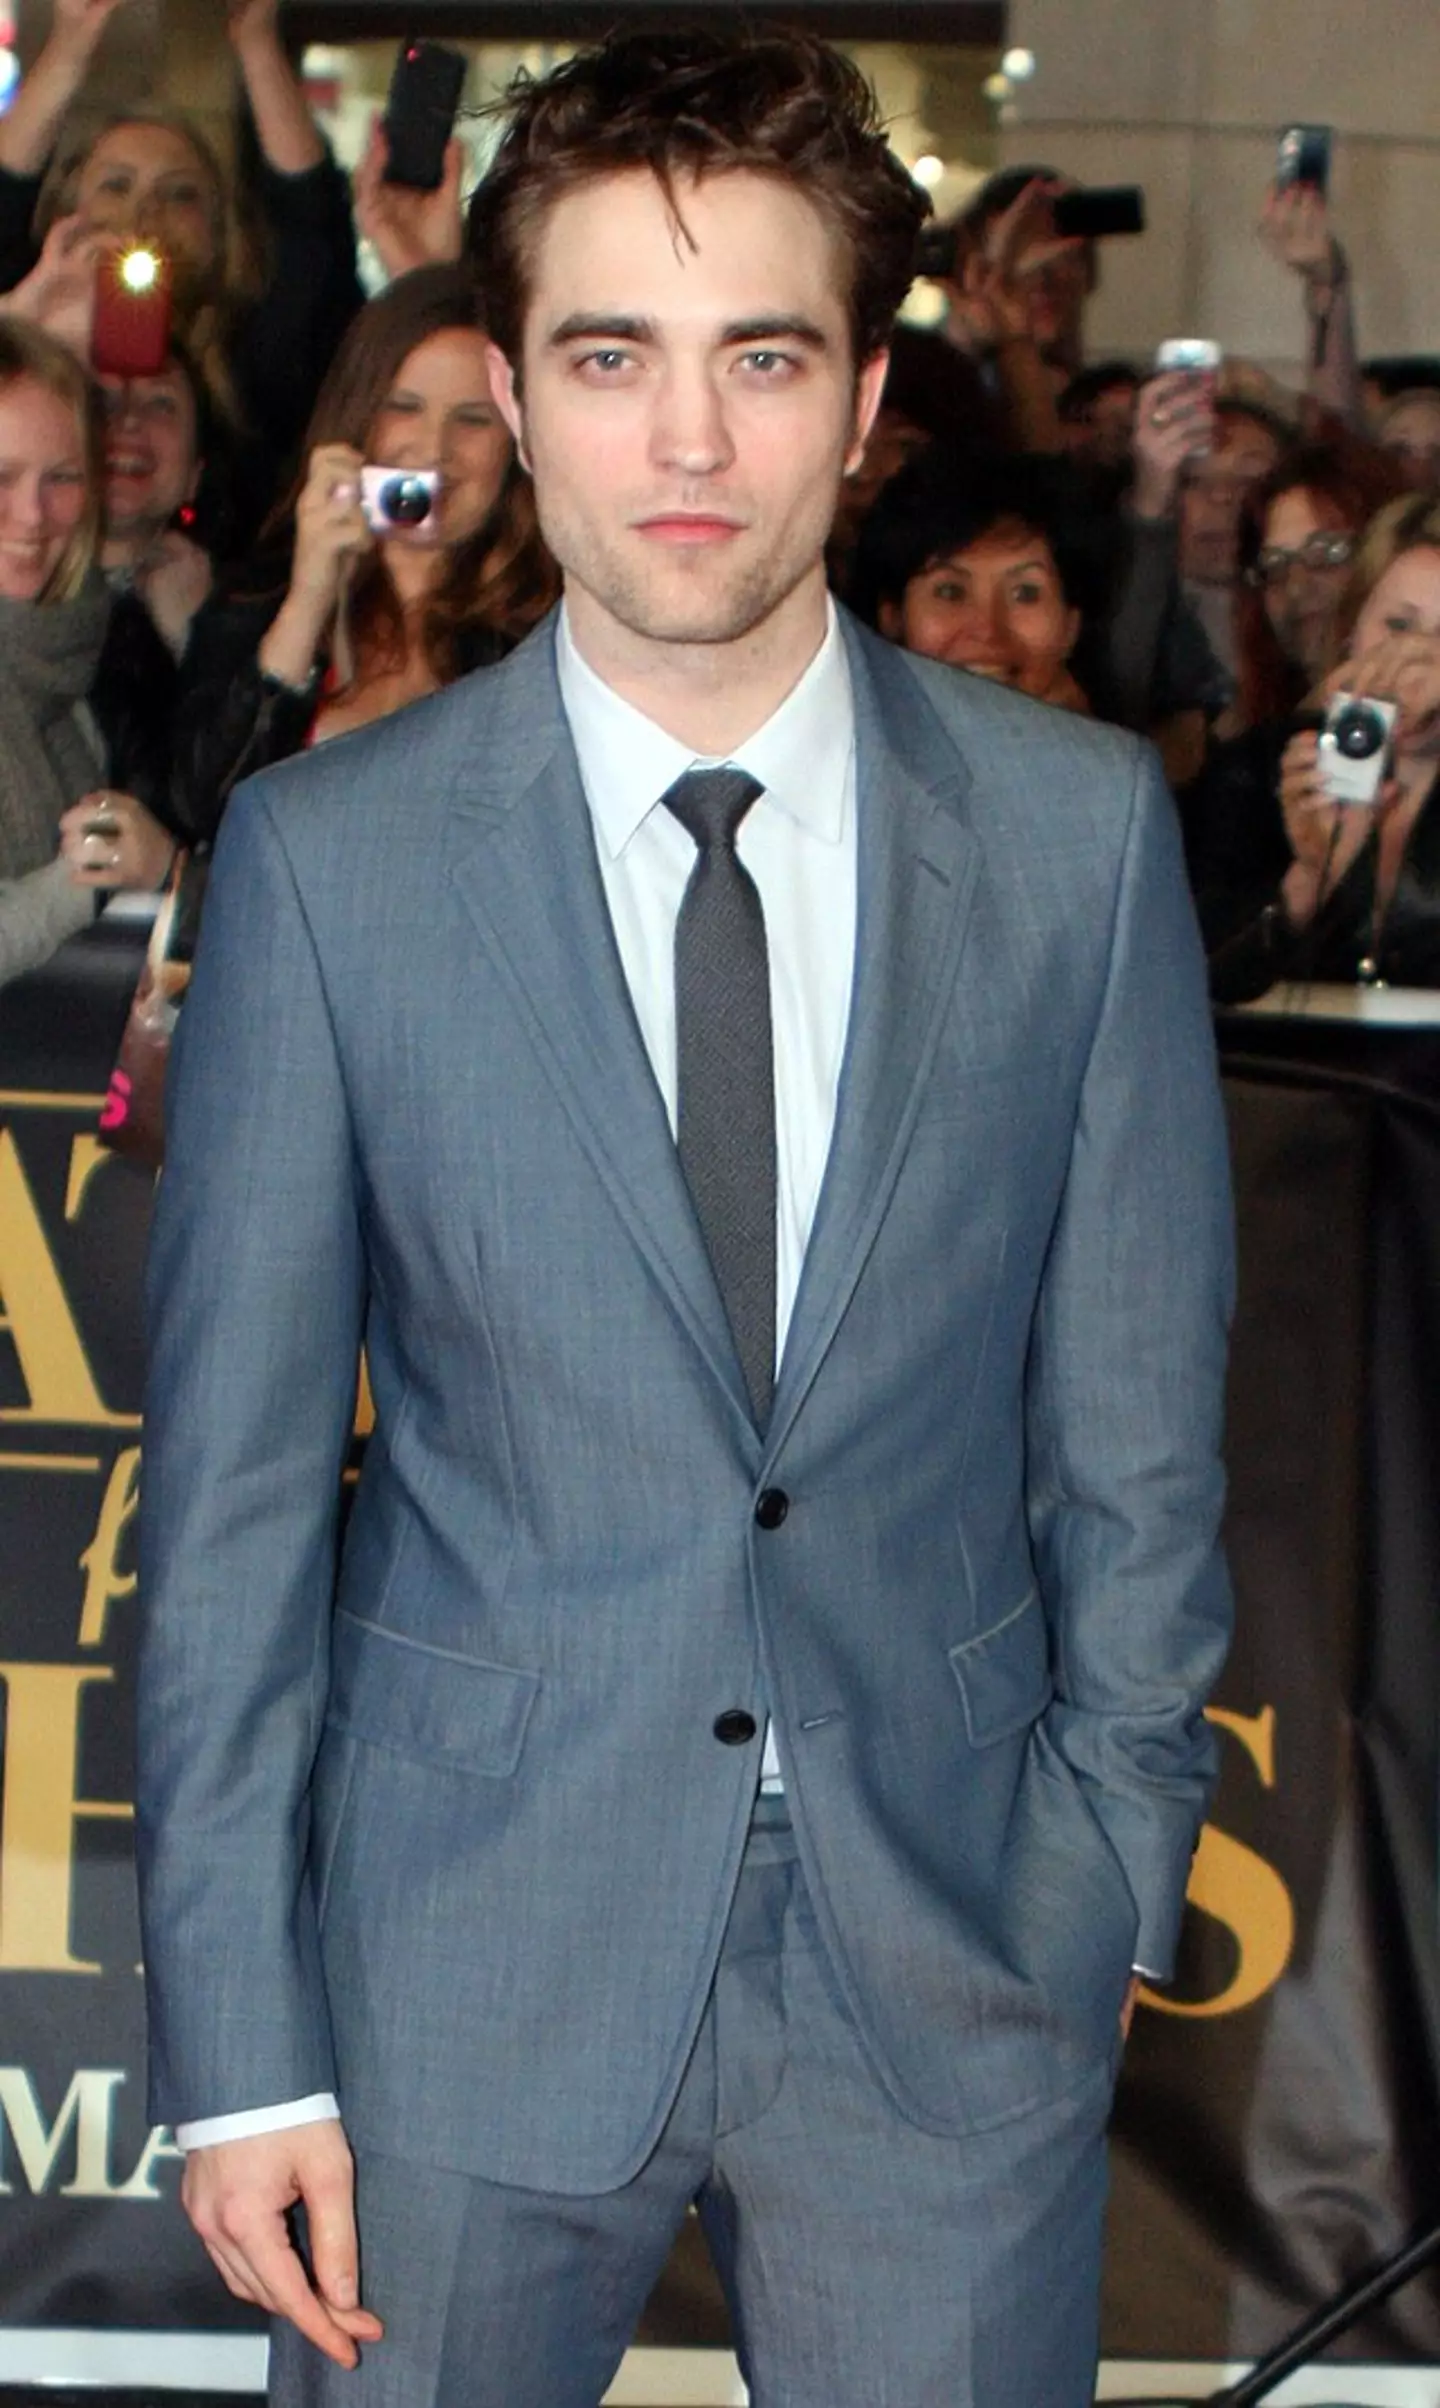 Robert Pattinson was previously said to be the most beautiful man in the world.